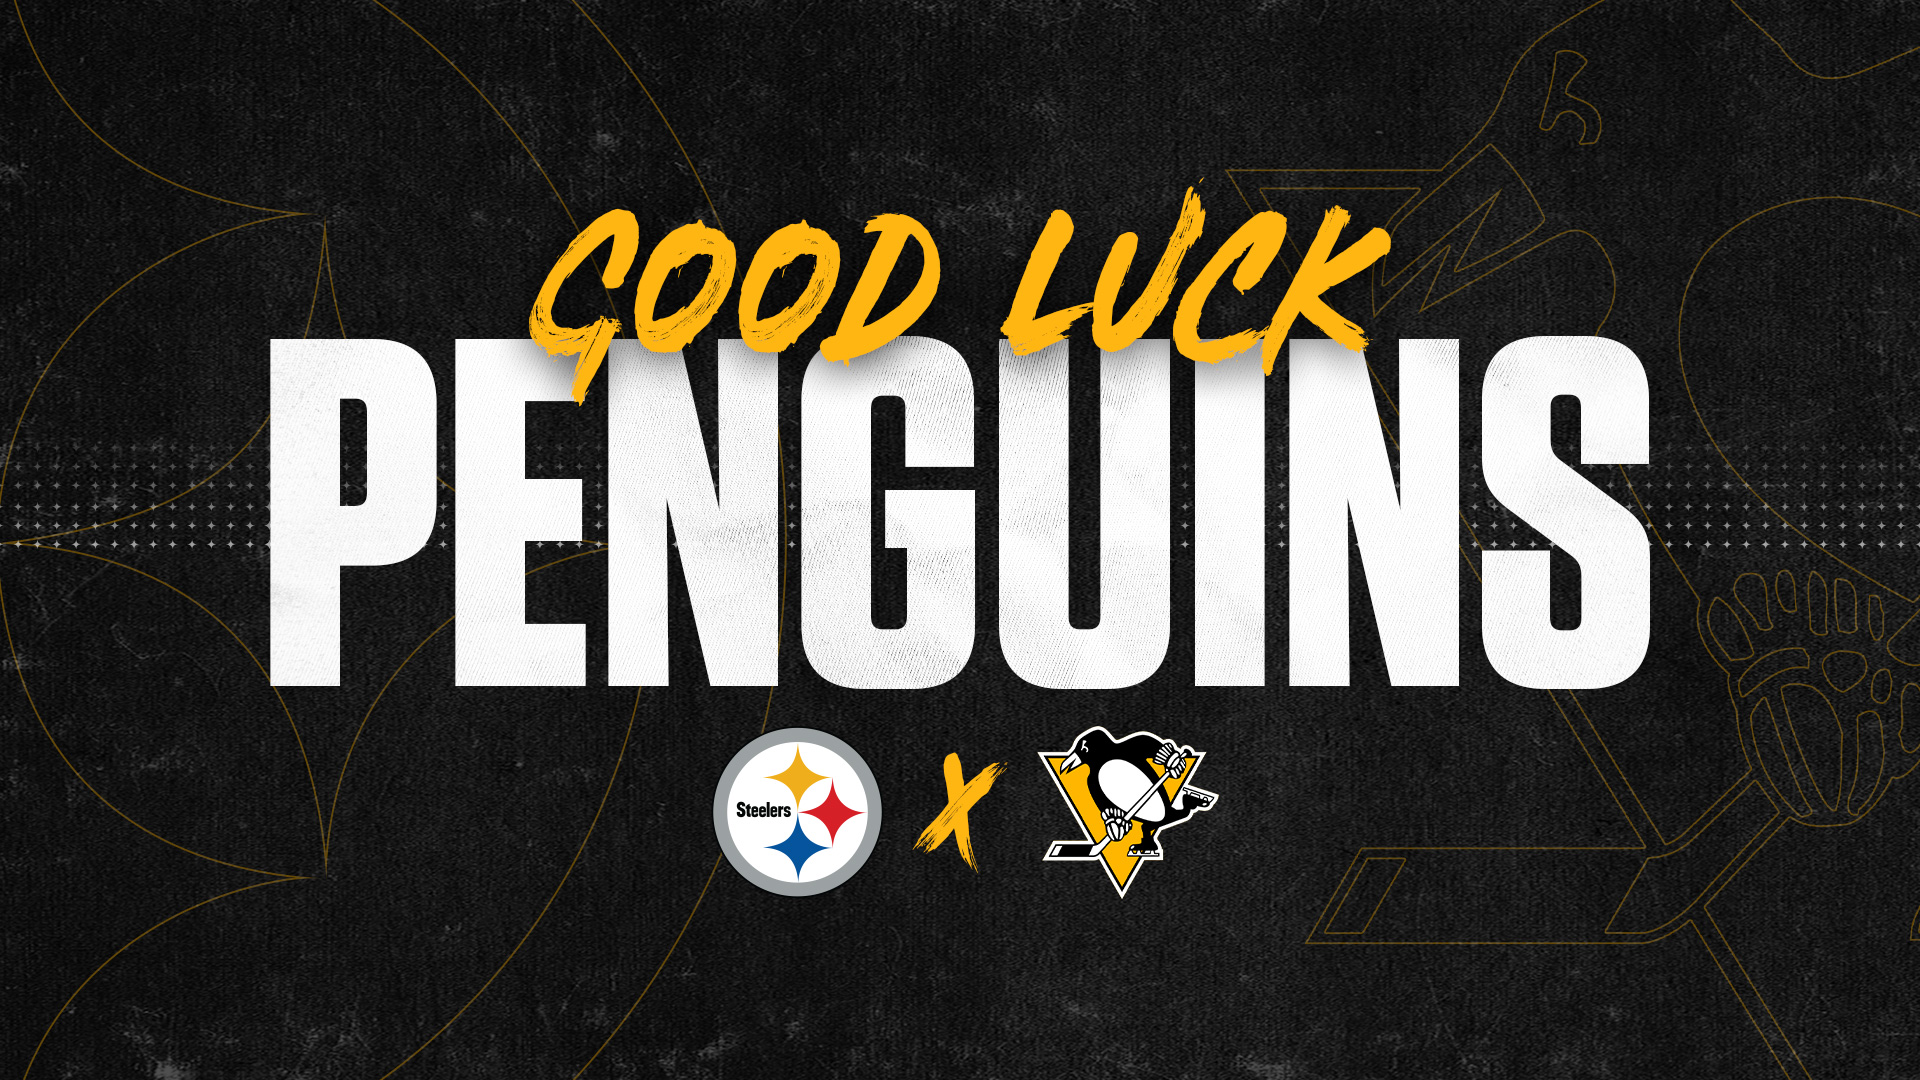 Pittsburgh Steelers on X: Good luck this season, @penguins! https